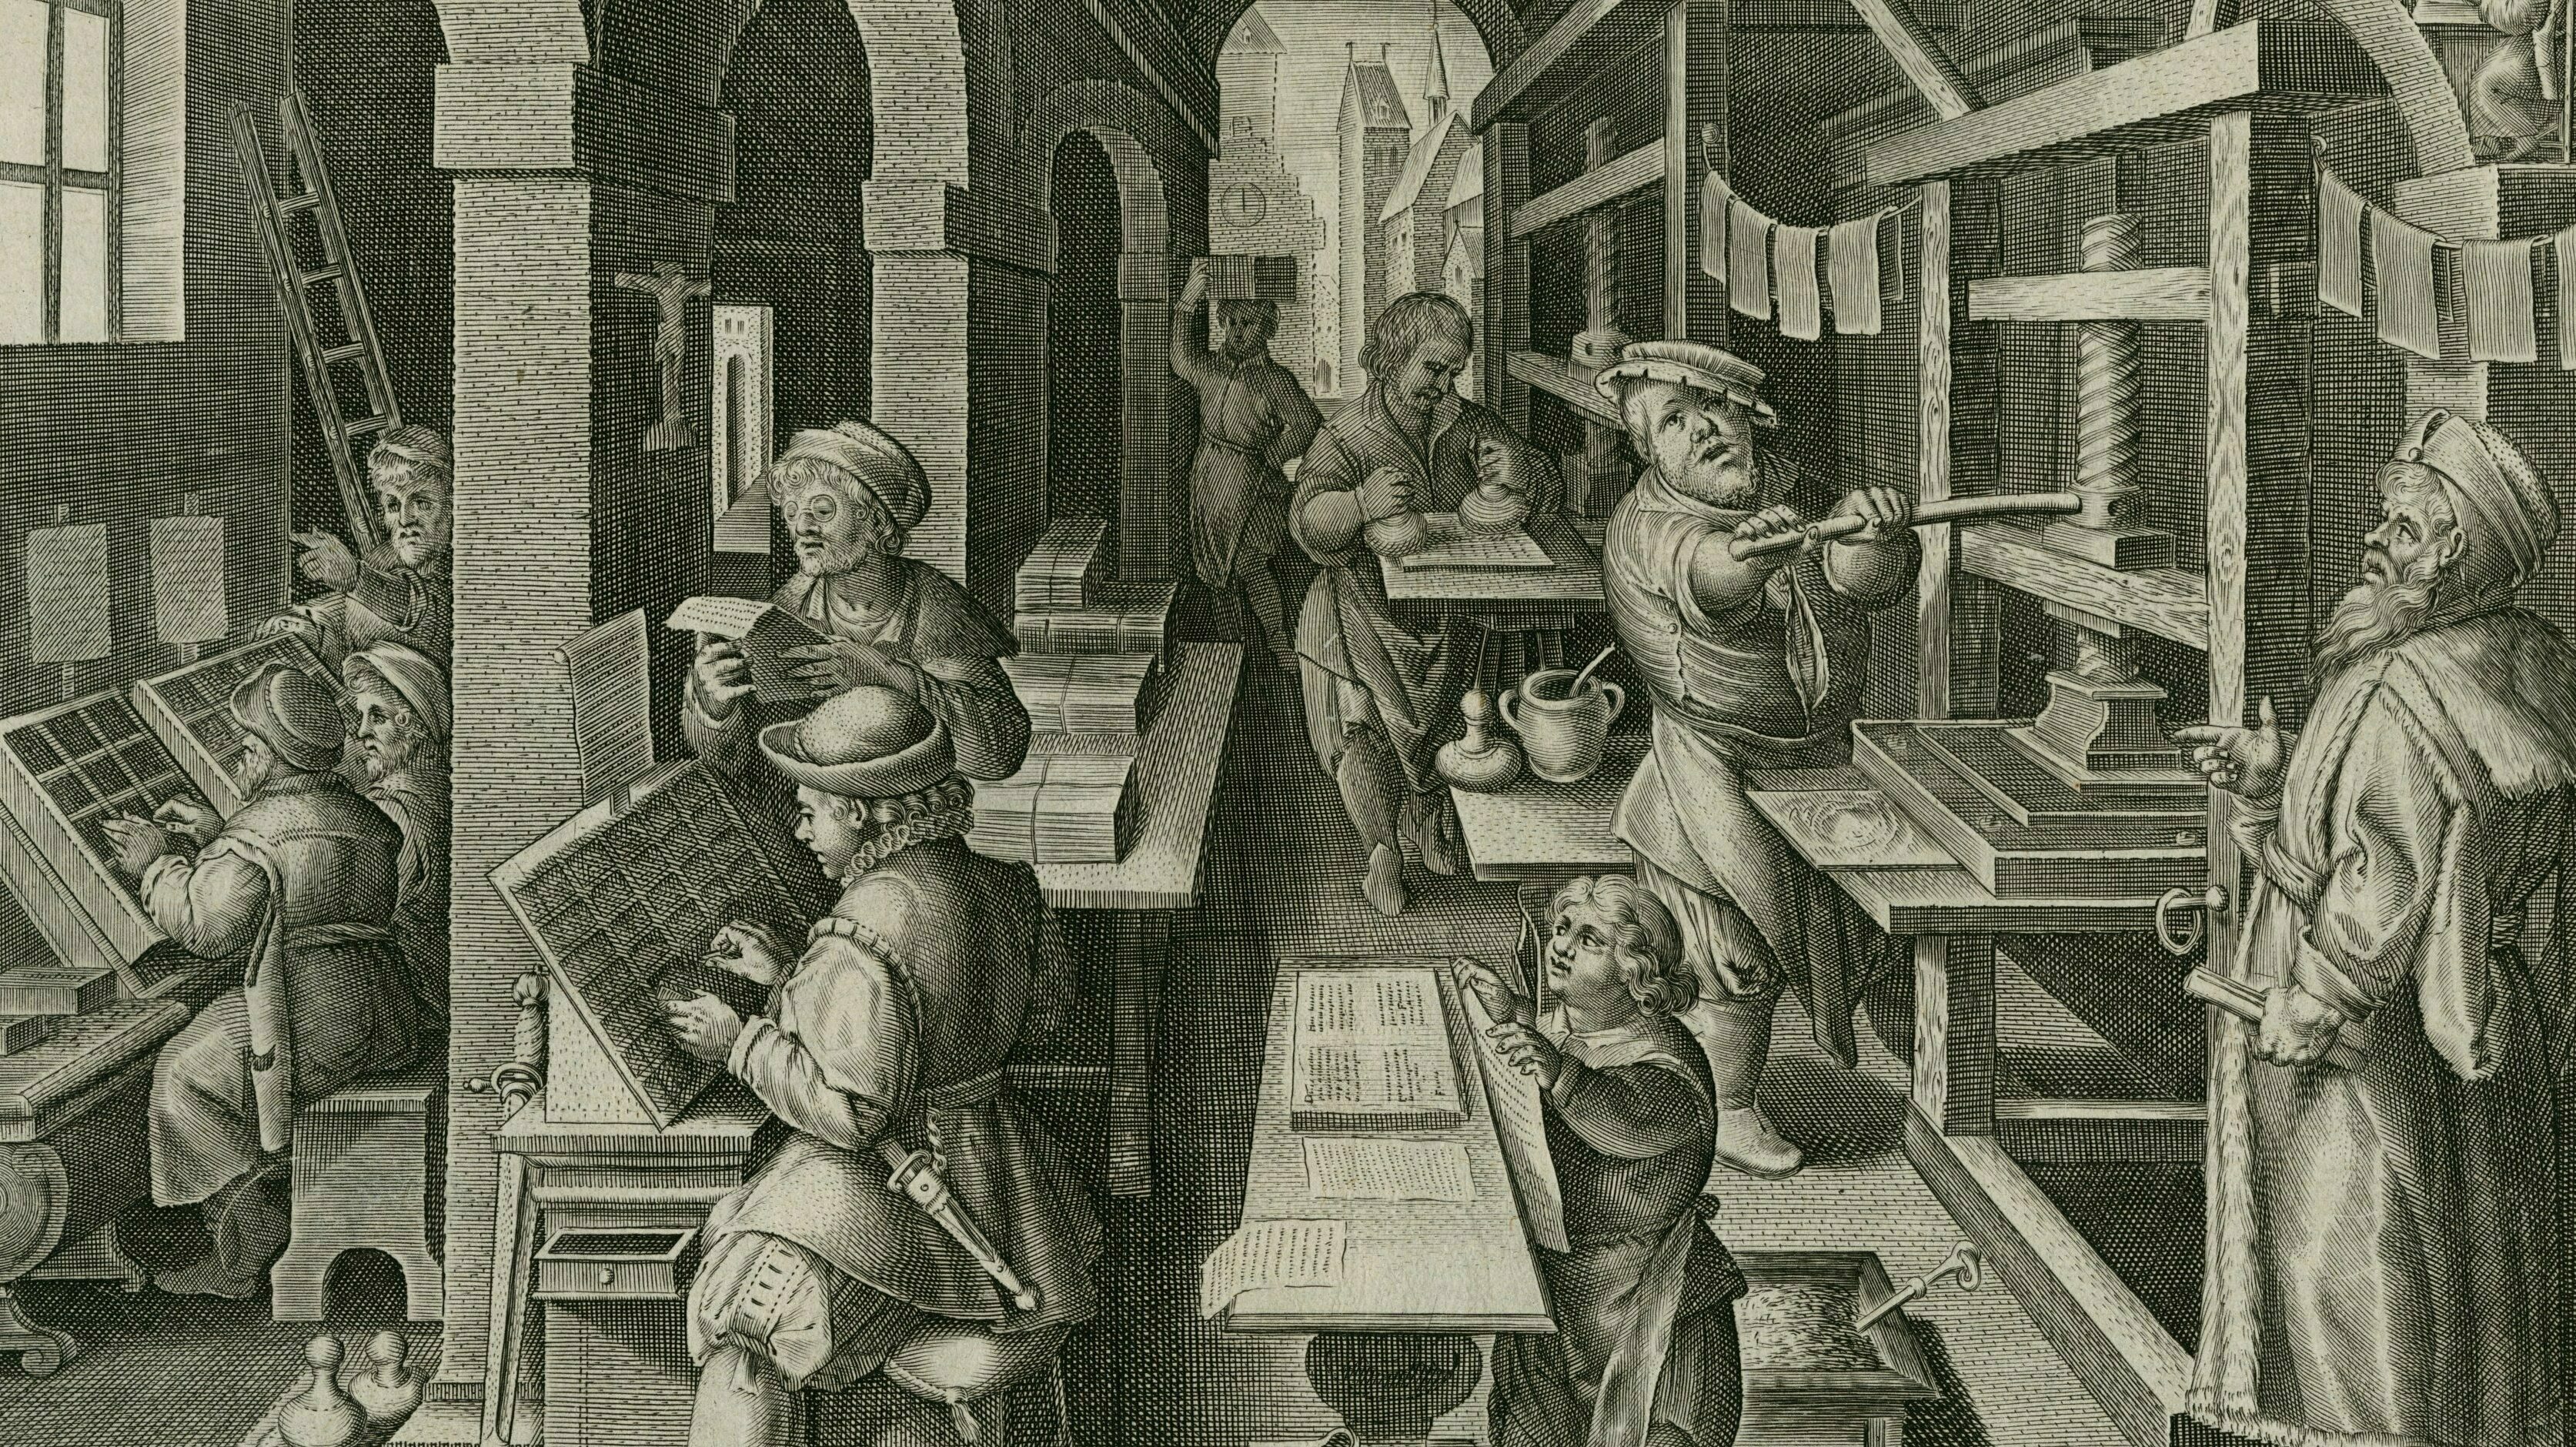 Workers in a printer's shop bustle about doing various tasks related to printing.